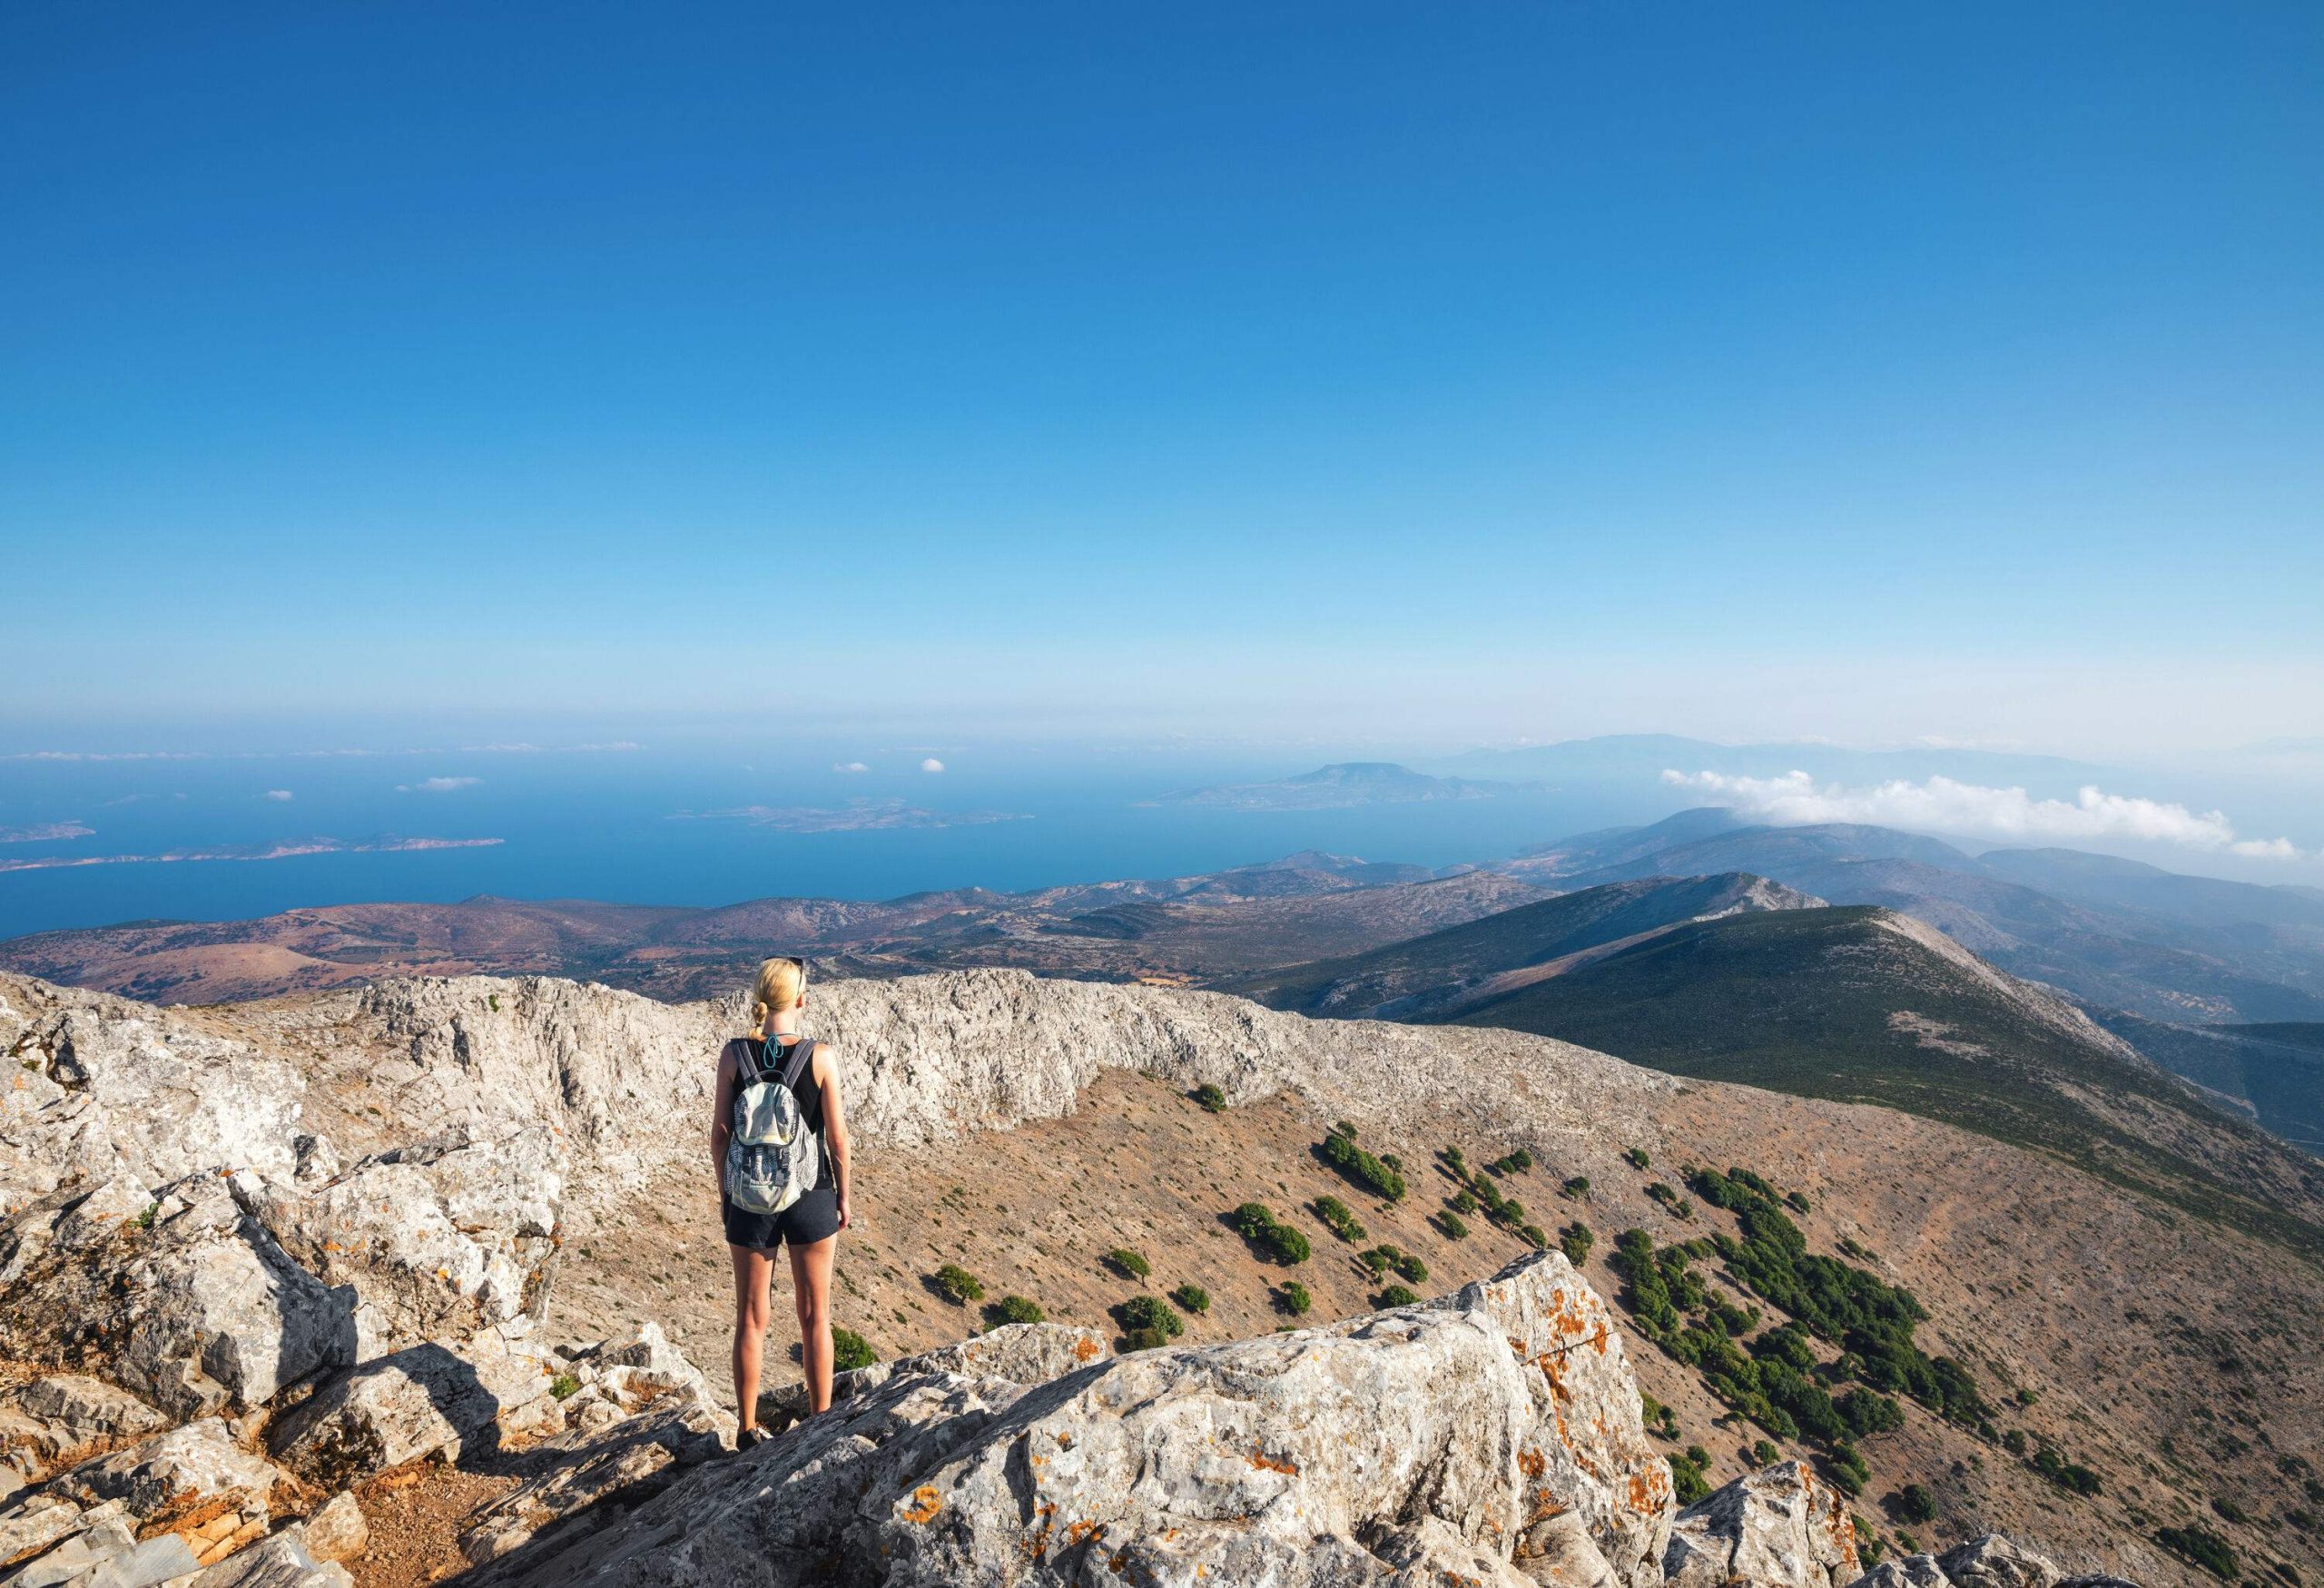 Woman standing at a rocky summit overlooking the mountains on the horizon.